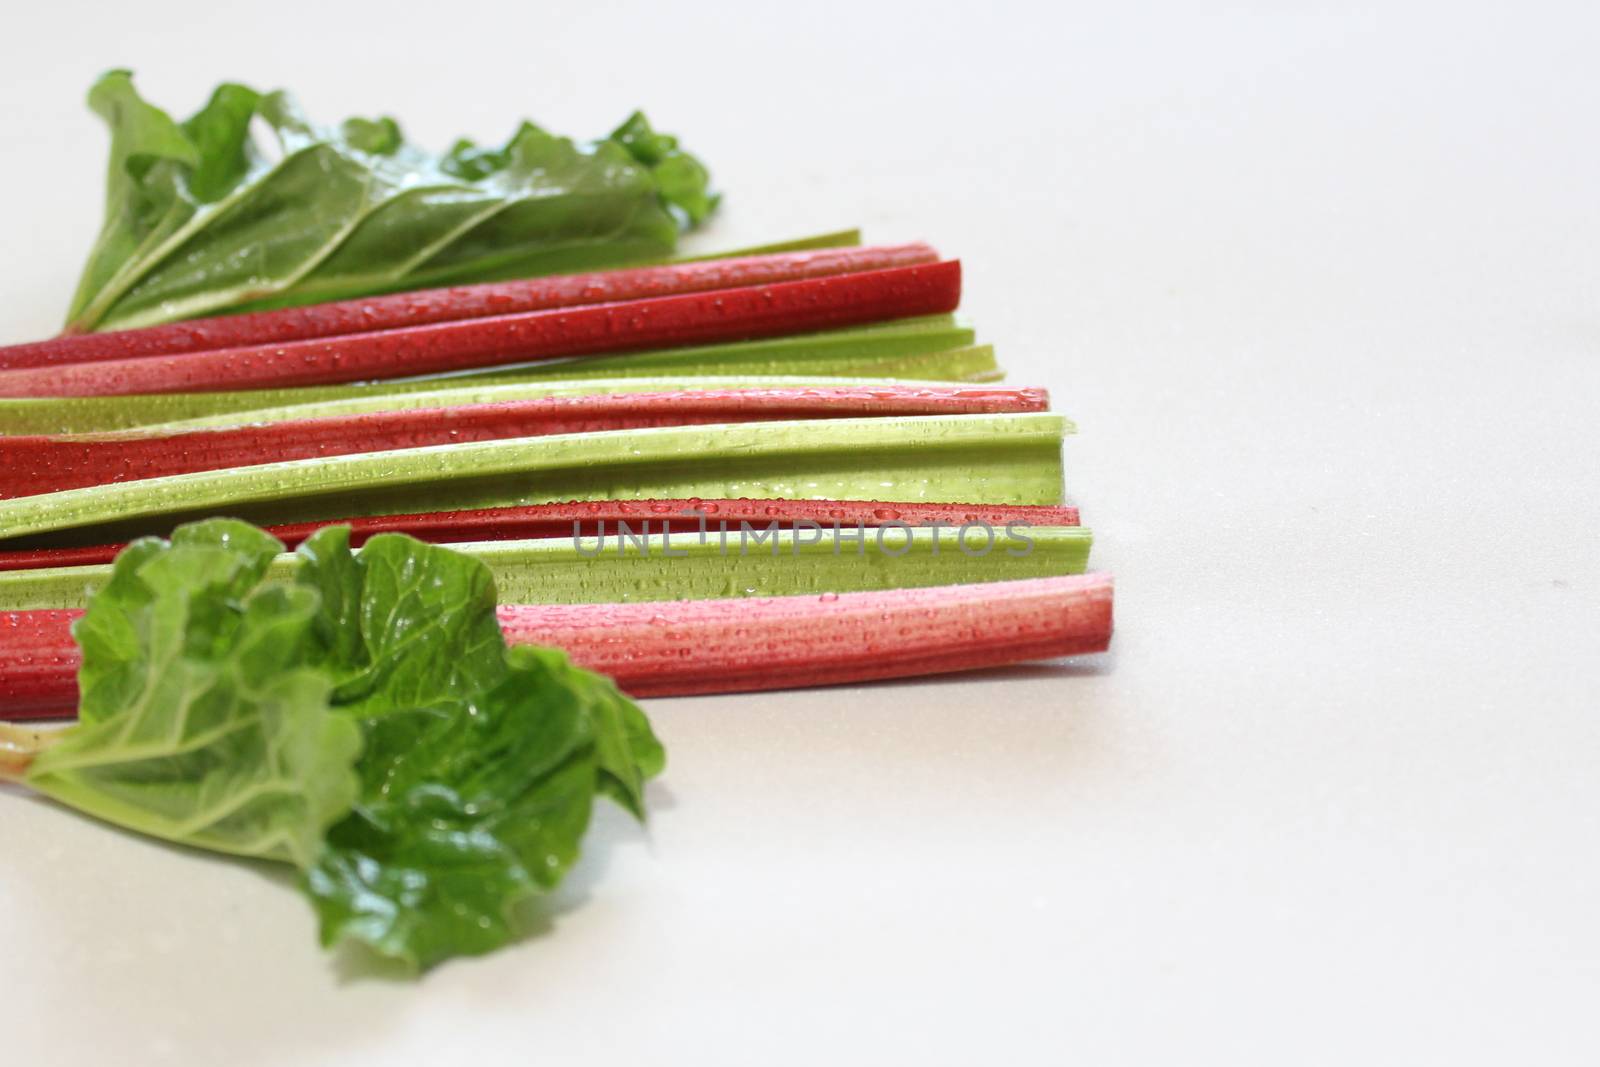 colorful delicious rhubarb with leaves by martina_unbehauen